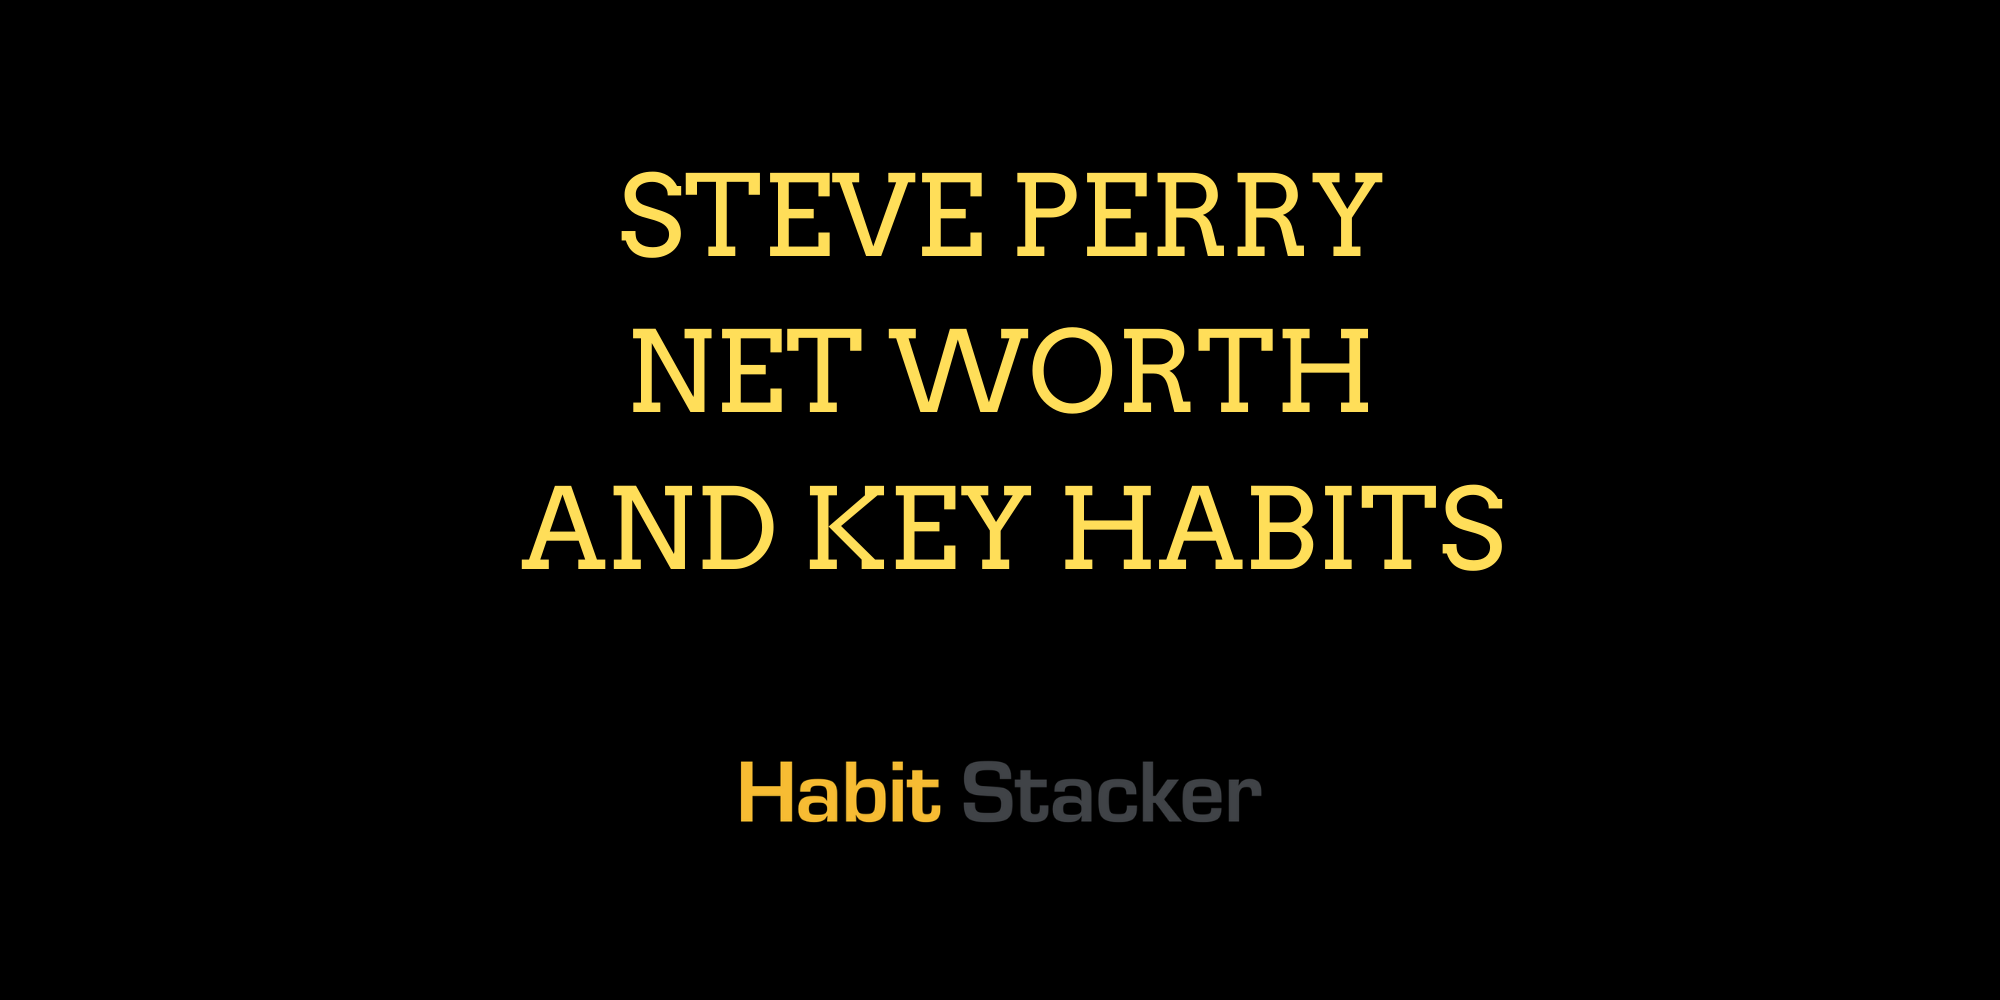 Steve Perry Net Worth And Key Habits